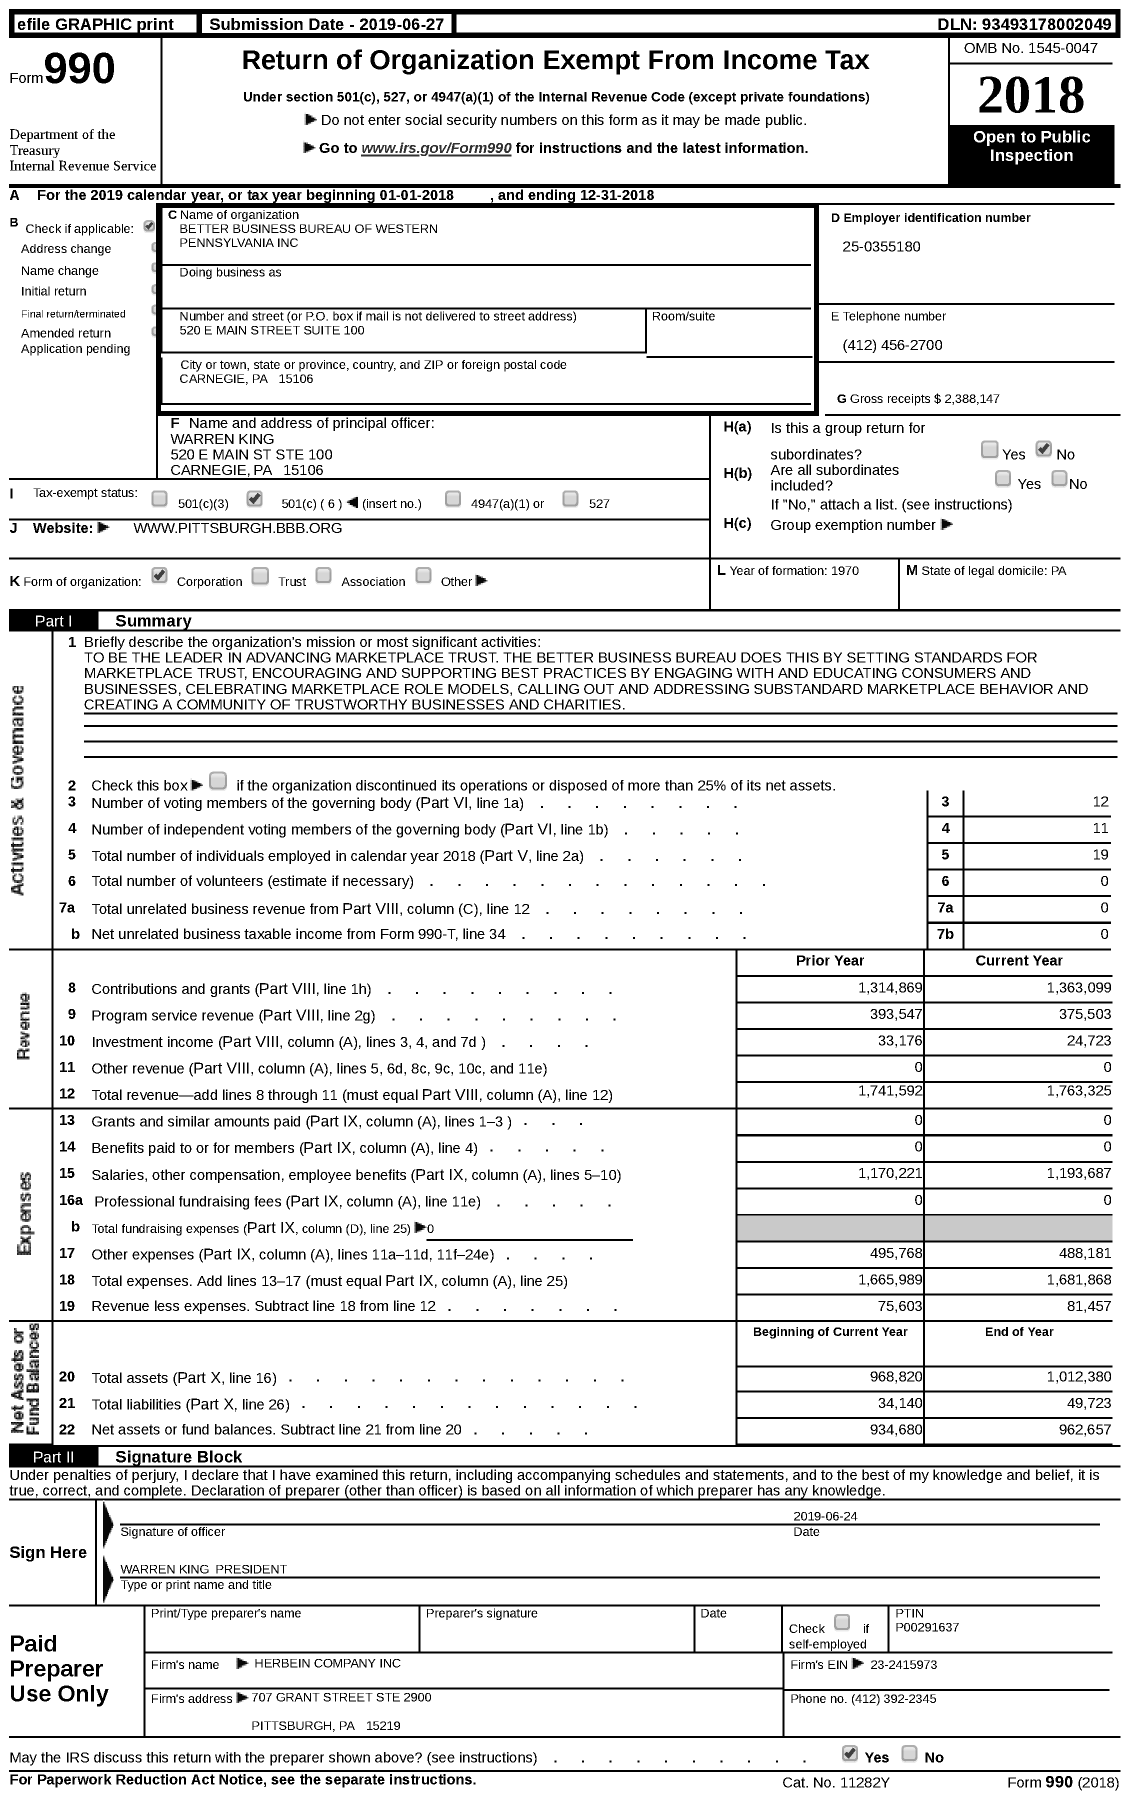 Image of first page of 2018 Form 990 for Better Business Bureau of Western Pennsylvania (BBB)